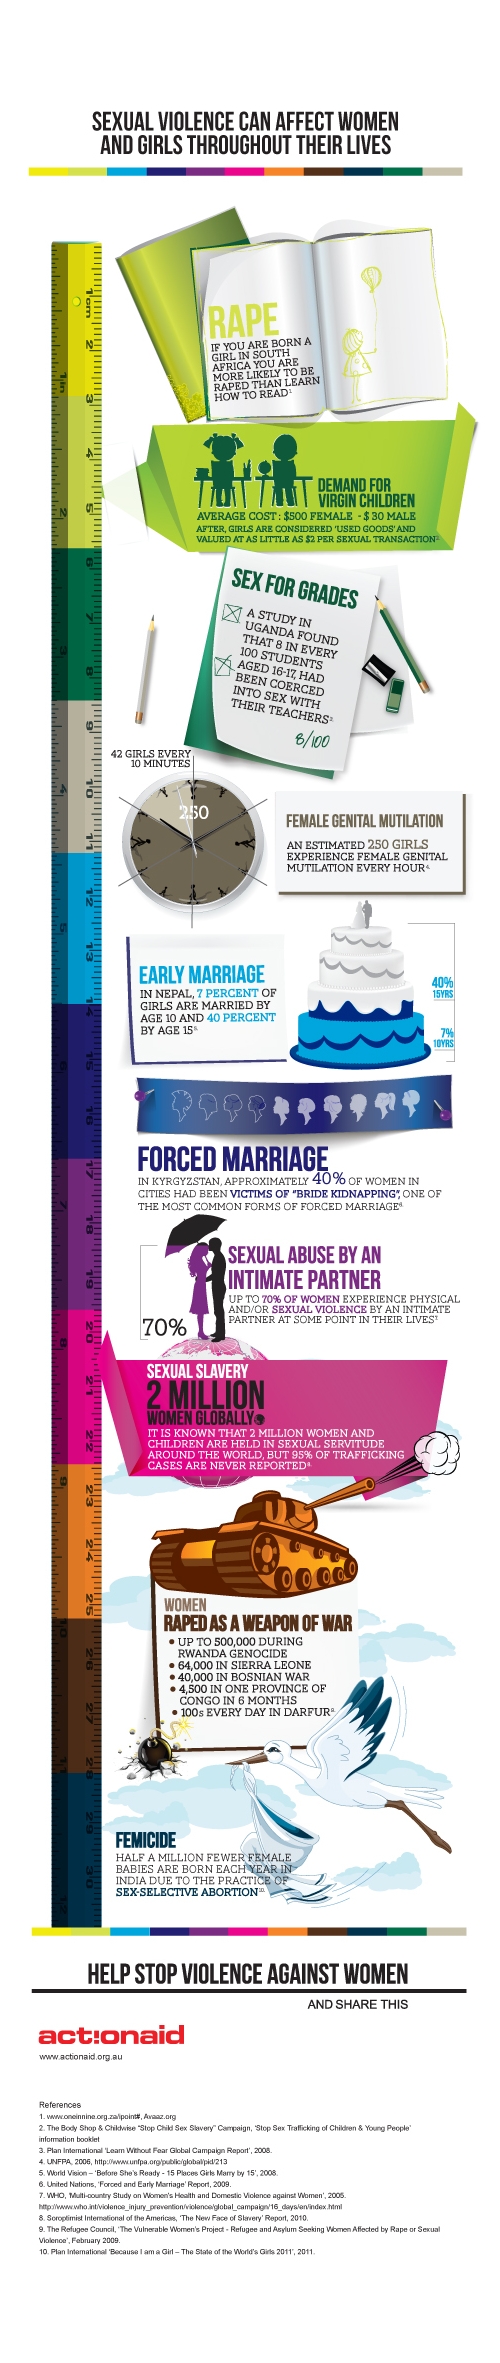 actionaid-infographic-abuse-of-women